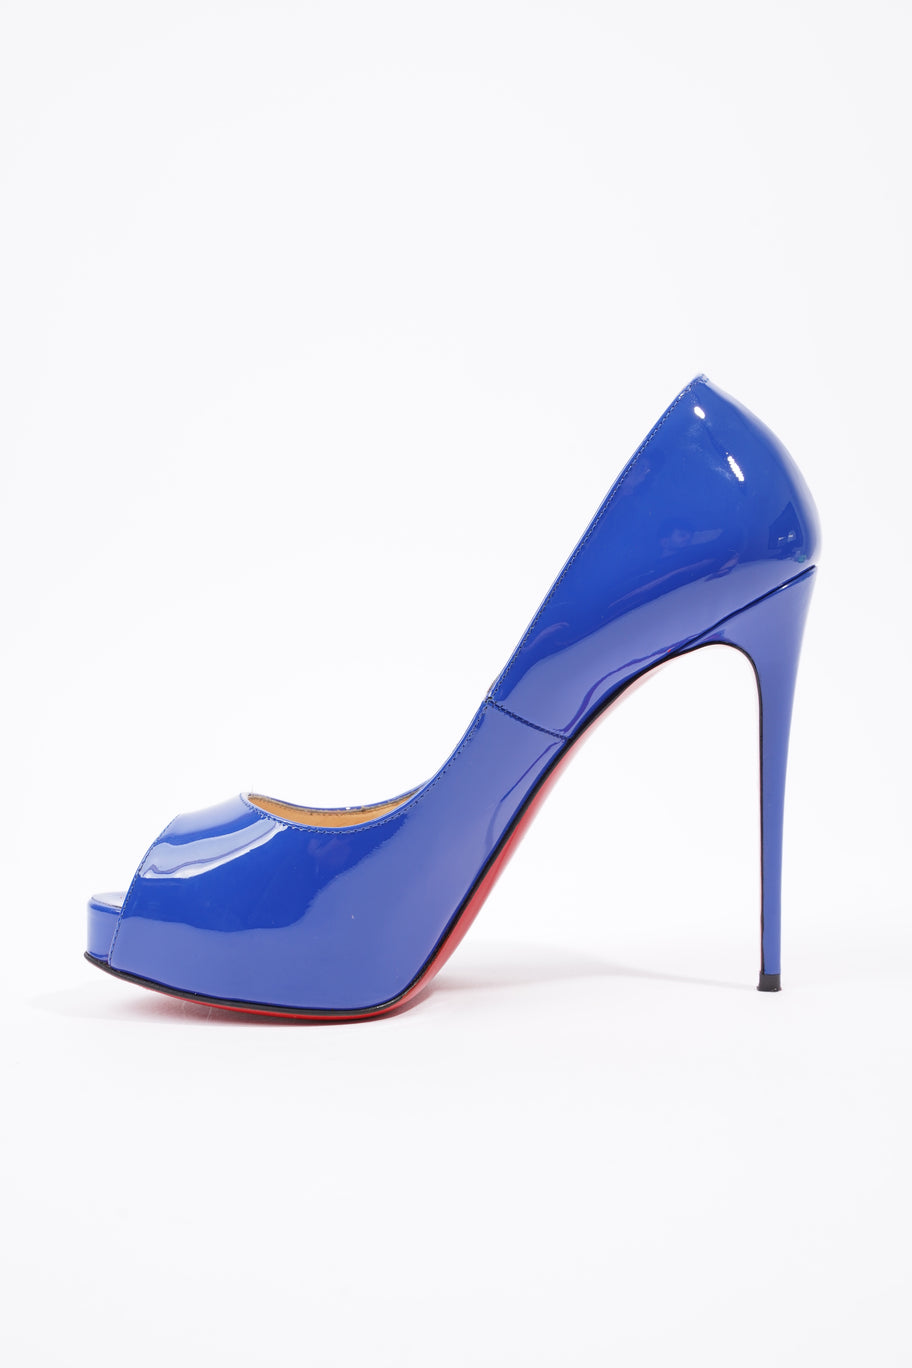 New Very Prive Heels 120 Blue Patent Leather EU 37.5 UK 4.5 Image 2